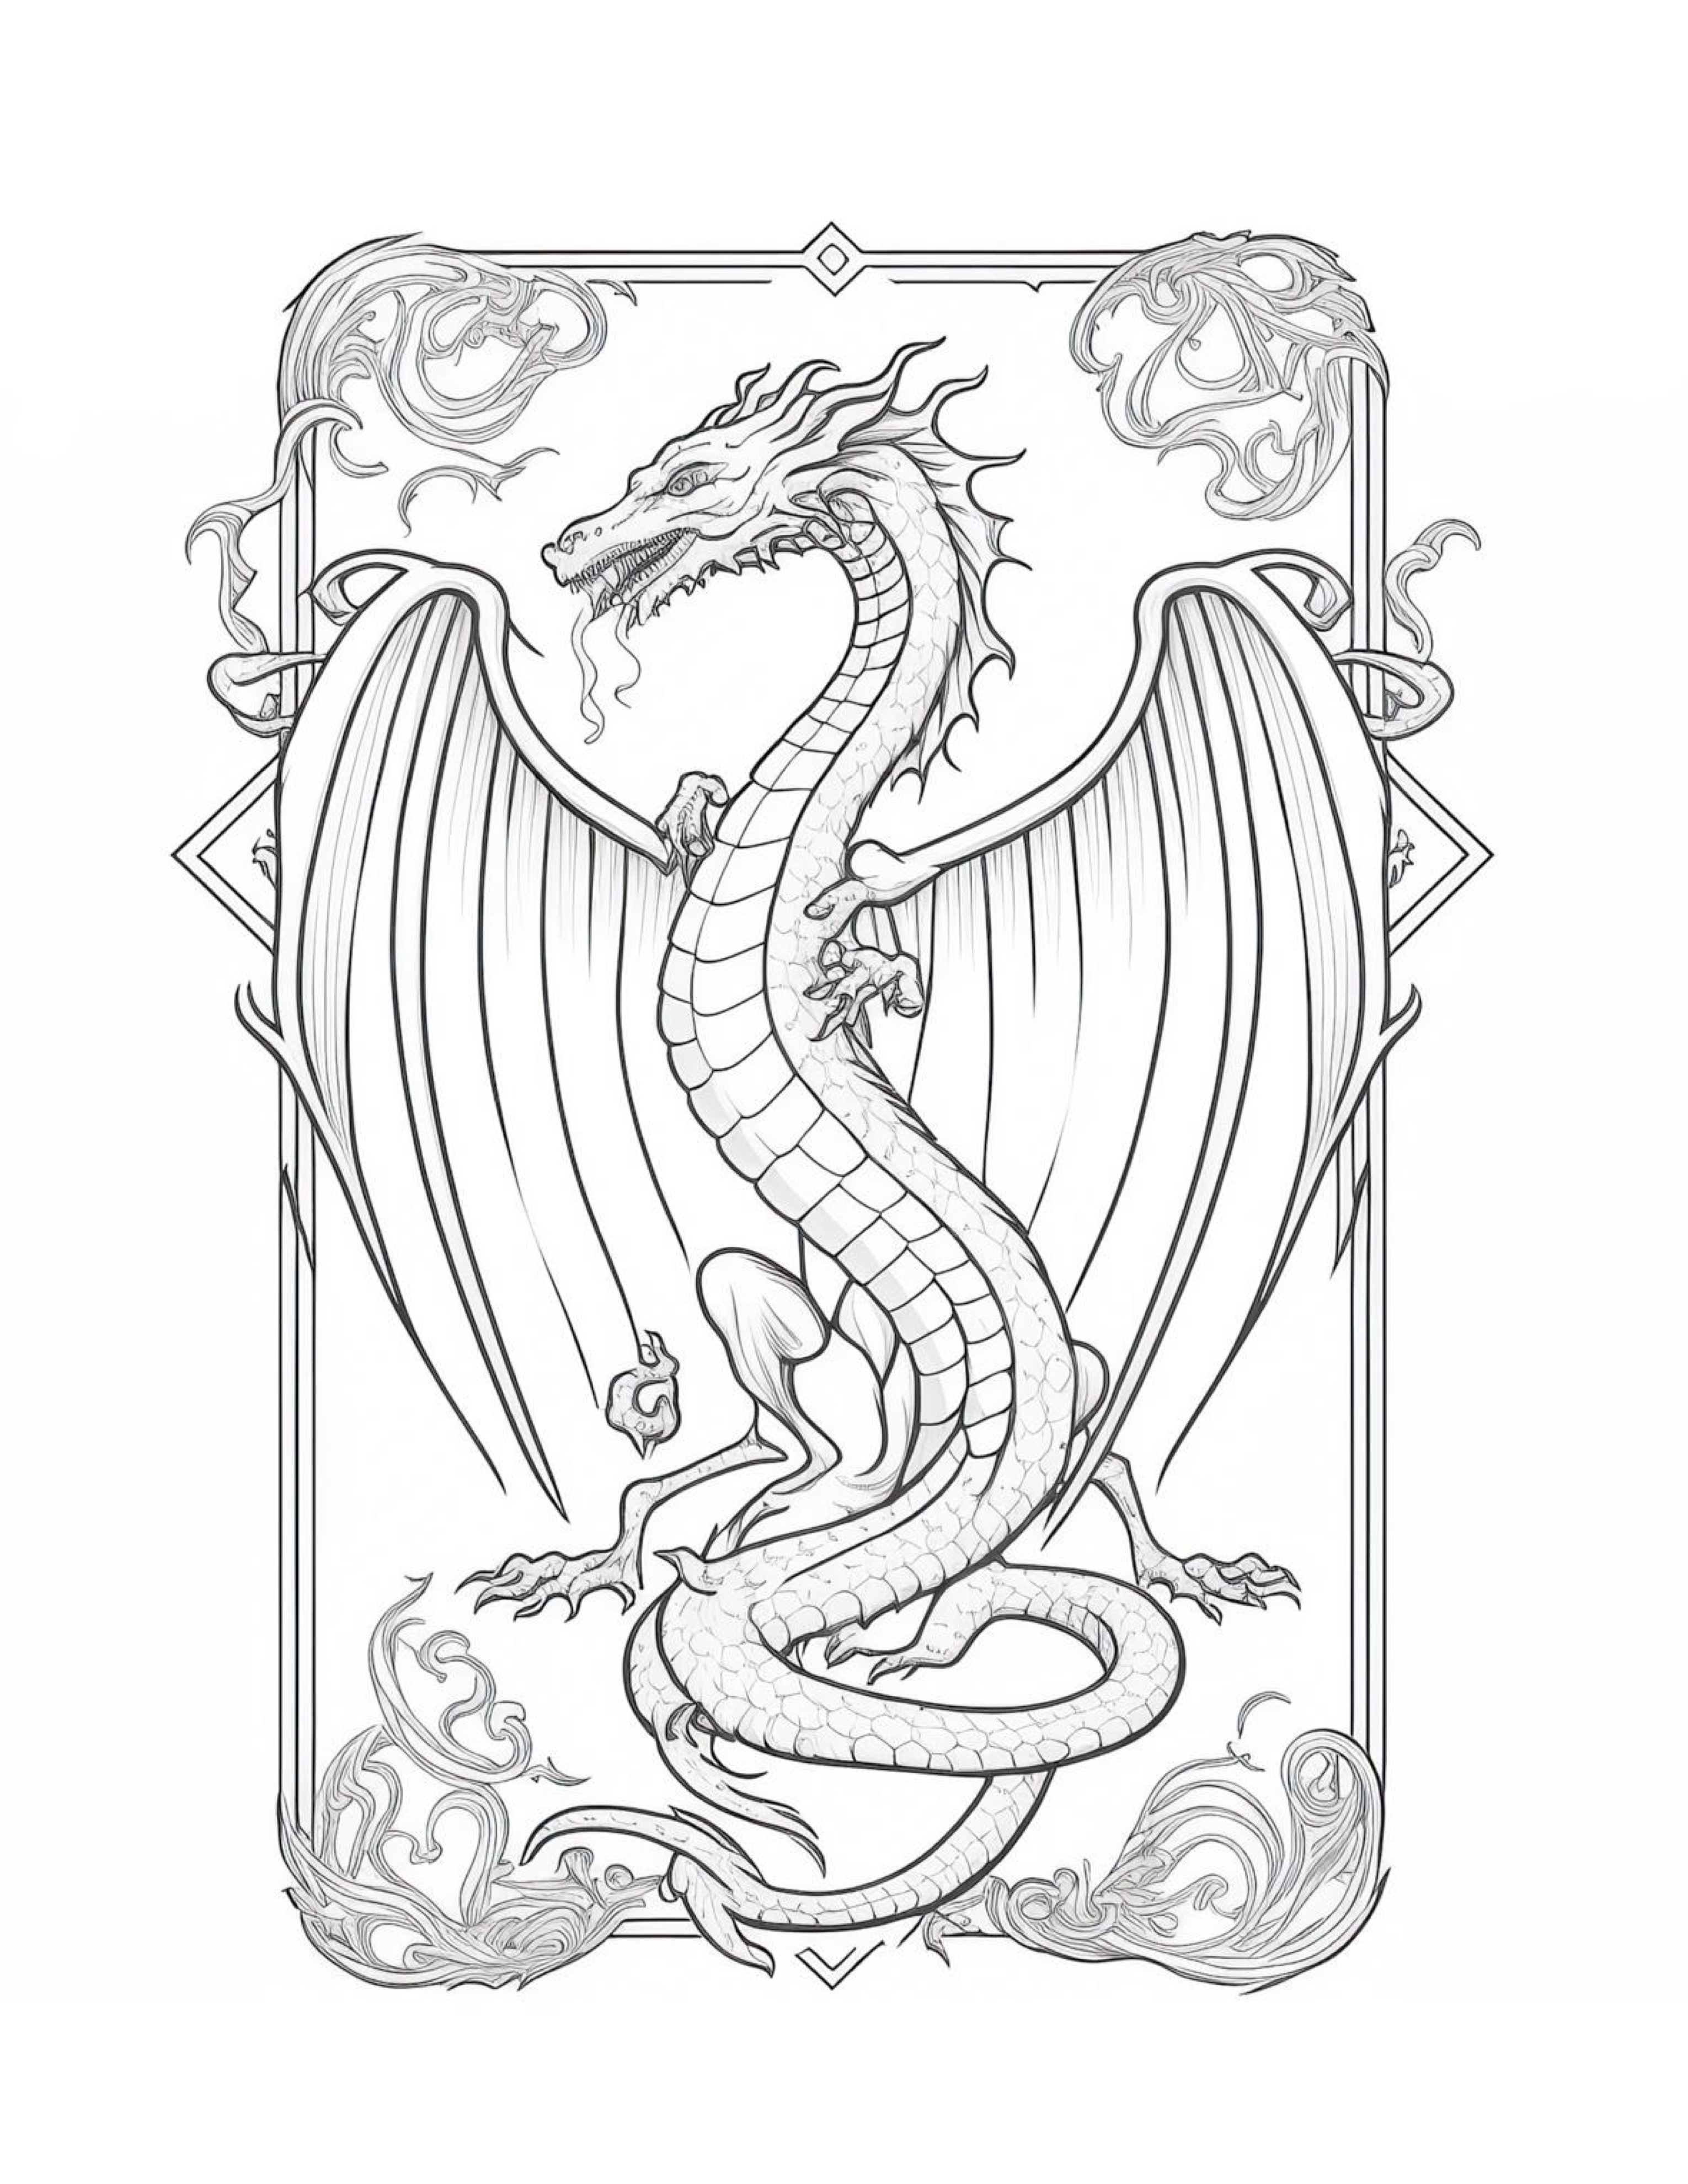 dragon-realistic-coloring-pages.jpg